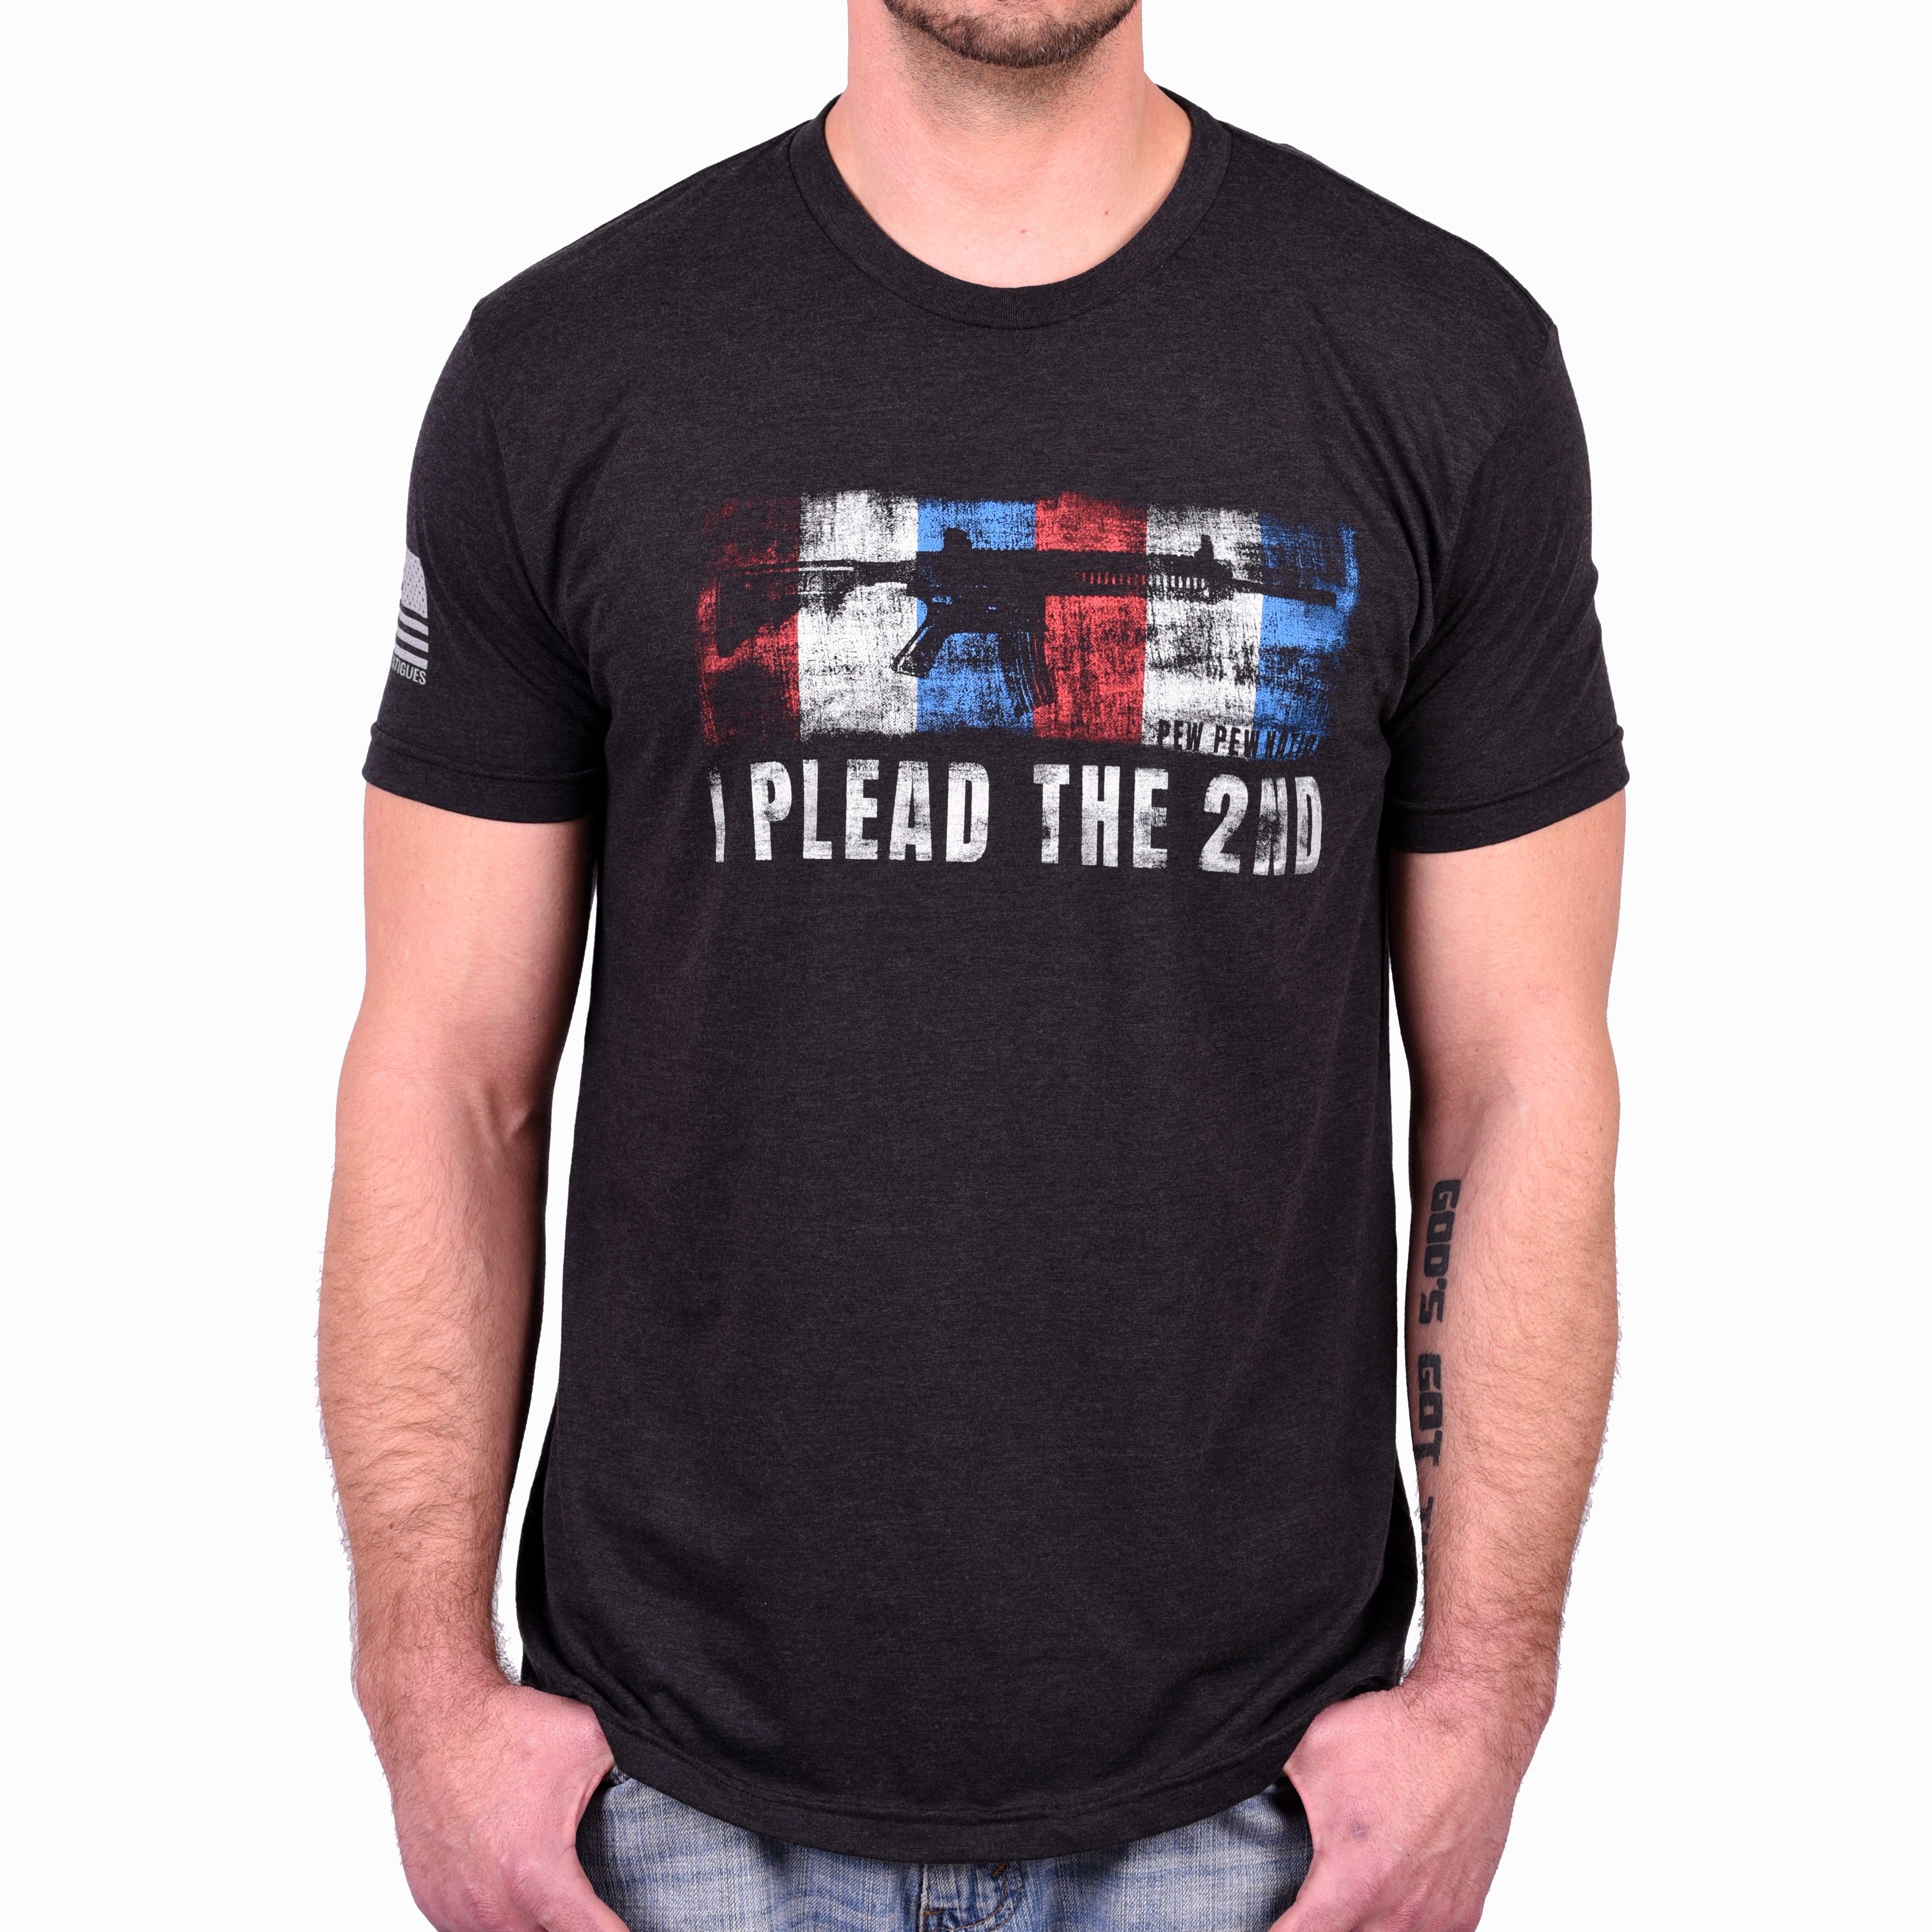 Men's "I Plead the 2nd" T-Shirt by Pew Pew Nation